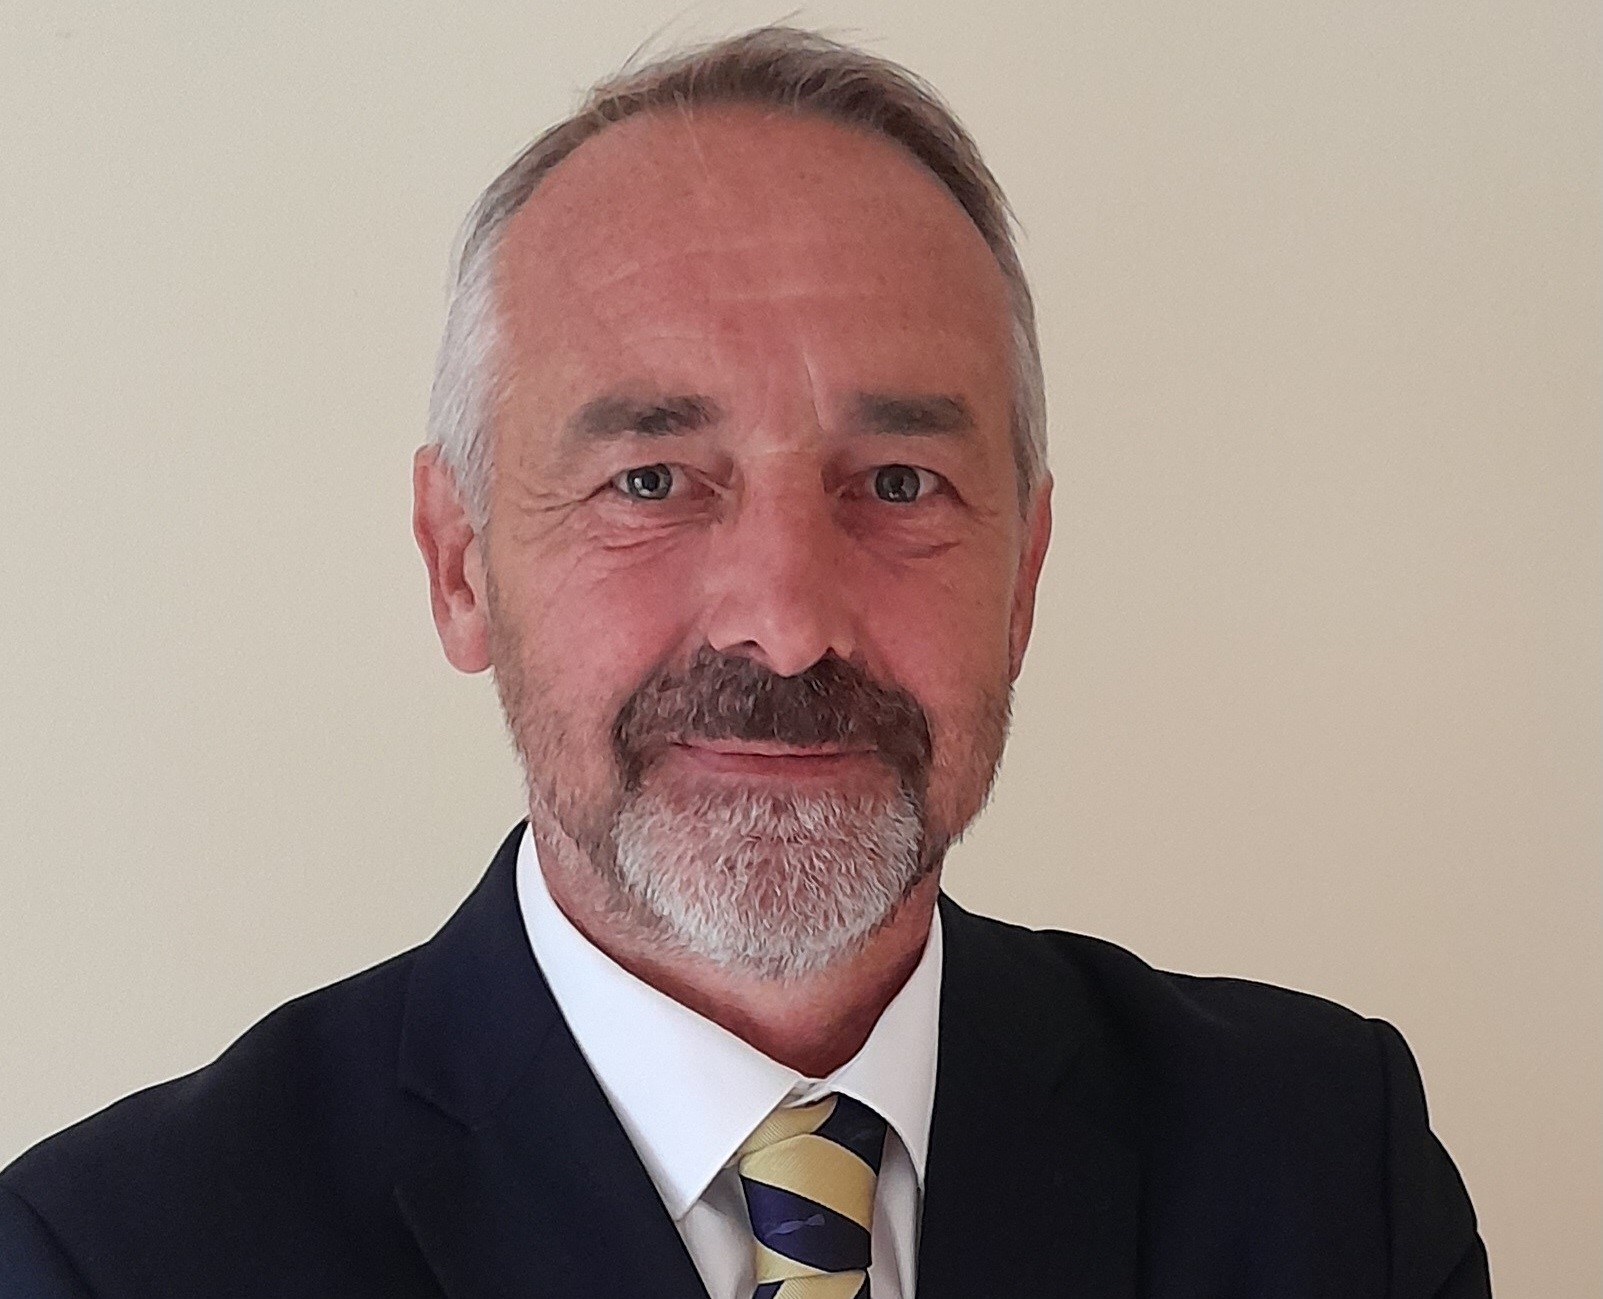 Tilbury Douglas appoints new health sector director